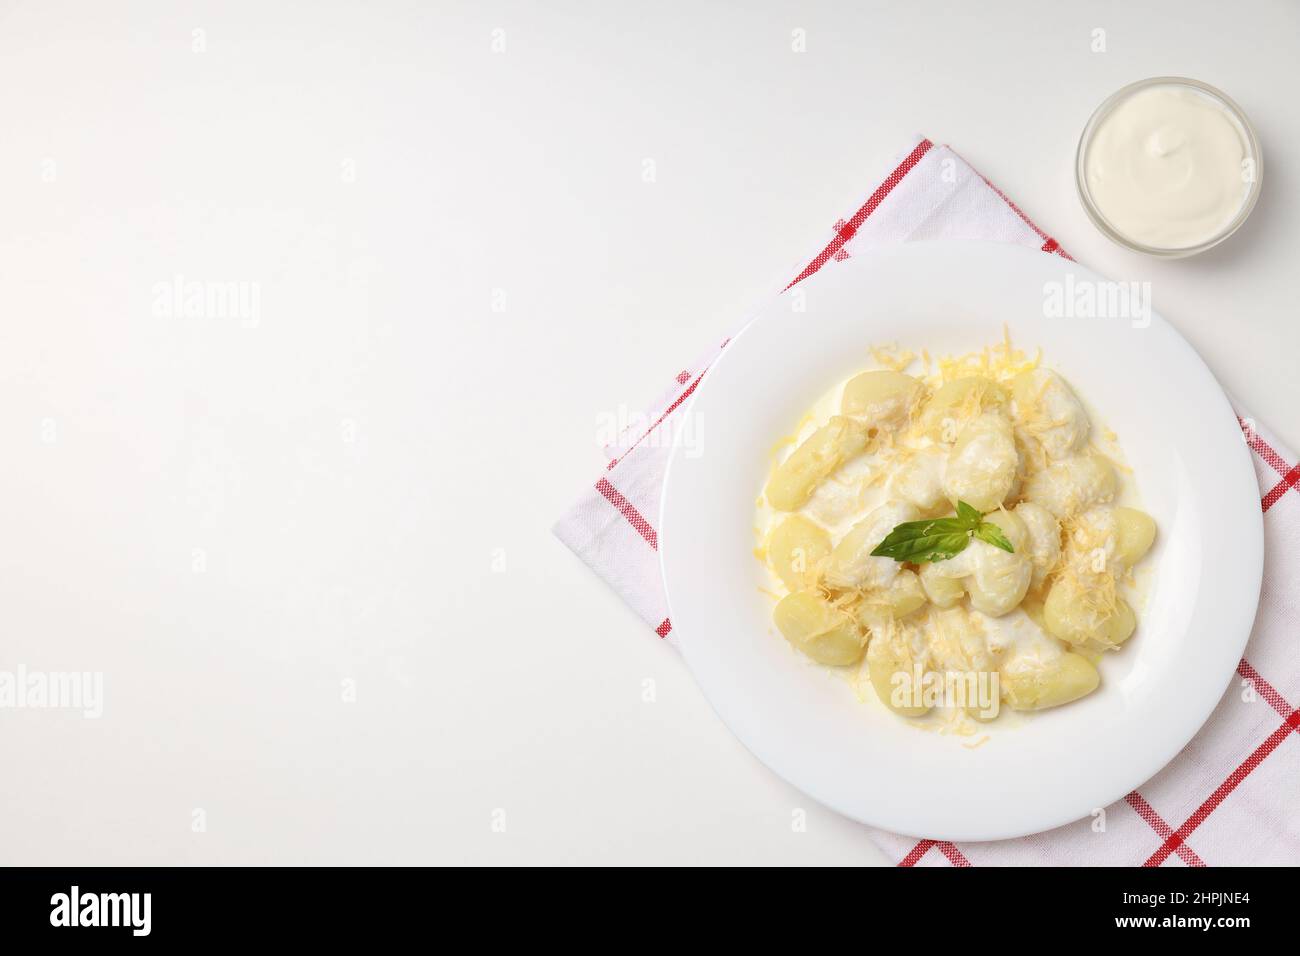 Concept of tasty food with gnocchi, space for text Stock Photo